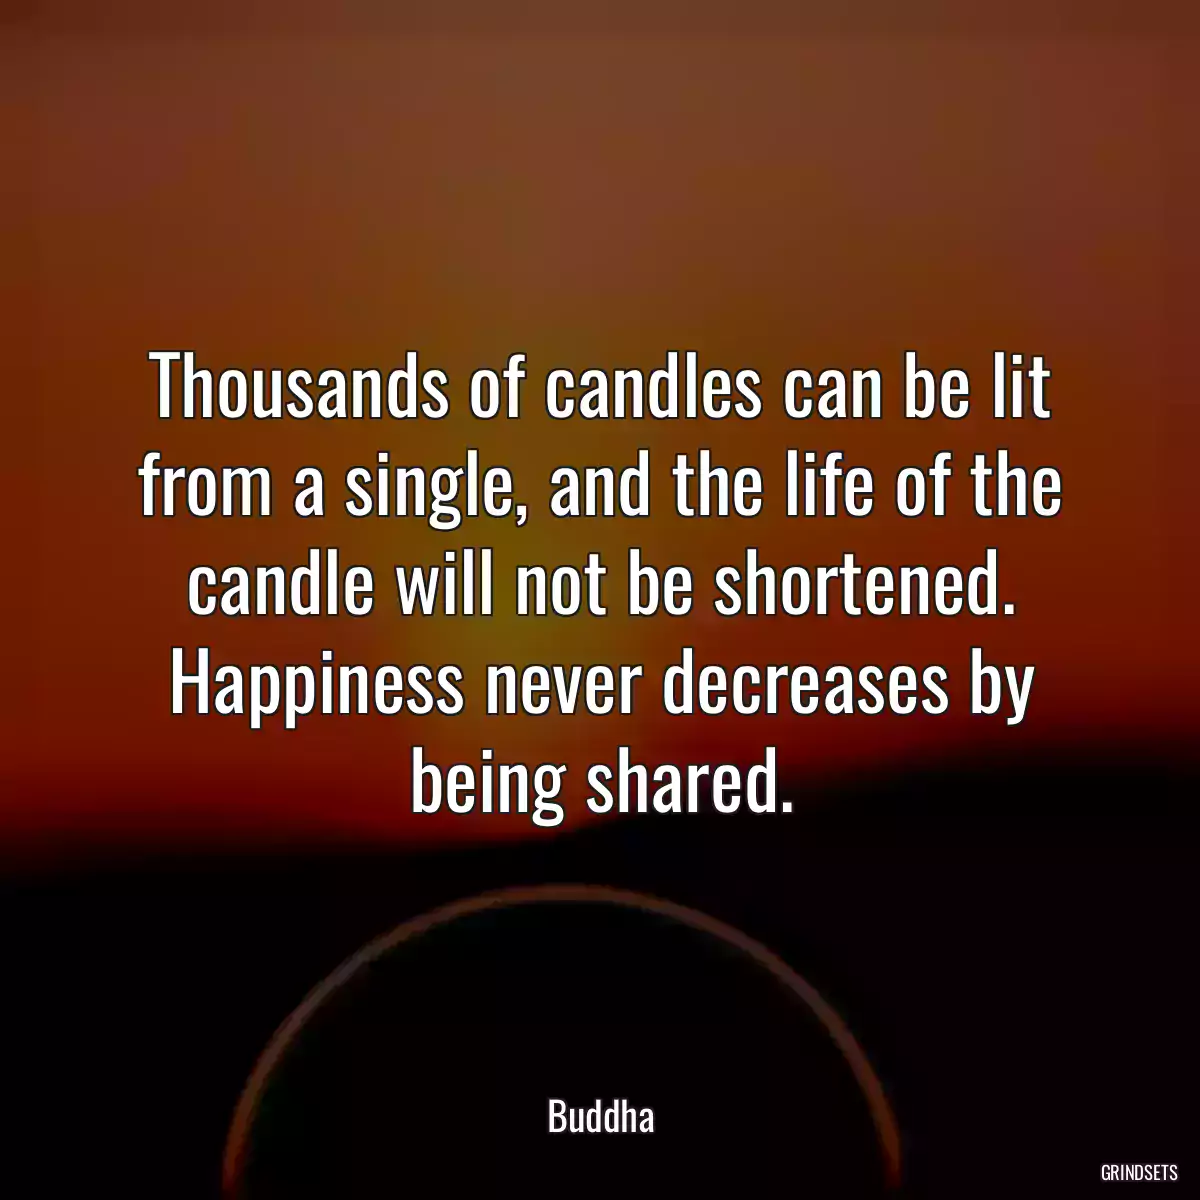 Thousands of candles can be lit from a single, and the life of the candle will not be shortened. Happiness never decreases by being shared.